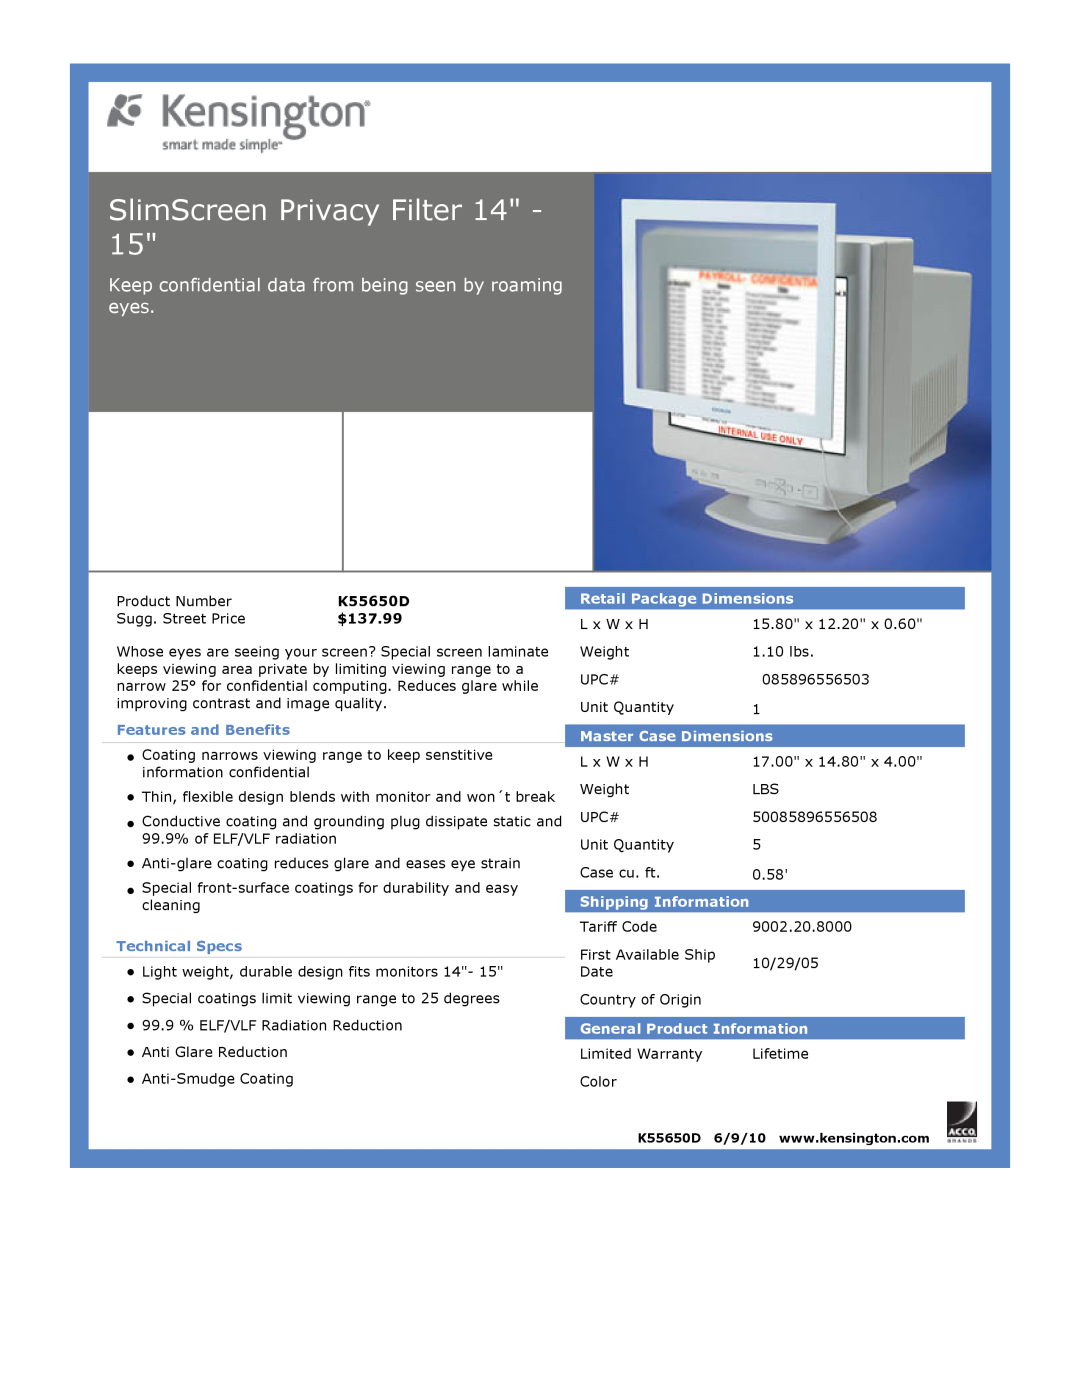 Kensington EU64325 SlimScreen Privacy Filter 14, $137.99, Features and Benefits, Technical Specs, Master Case Dimensions 